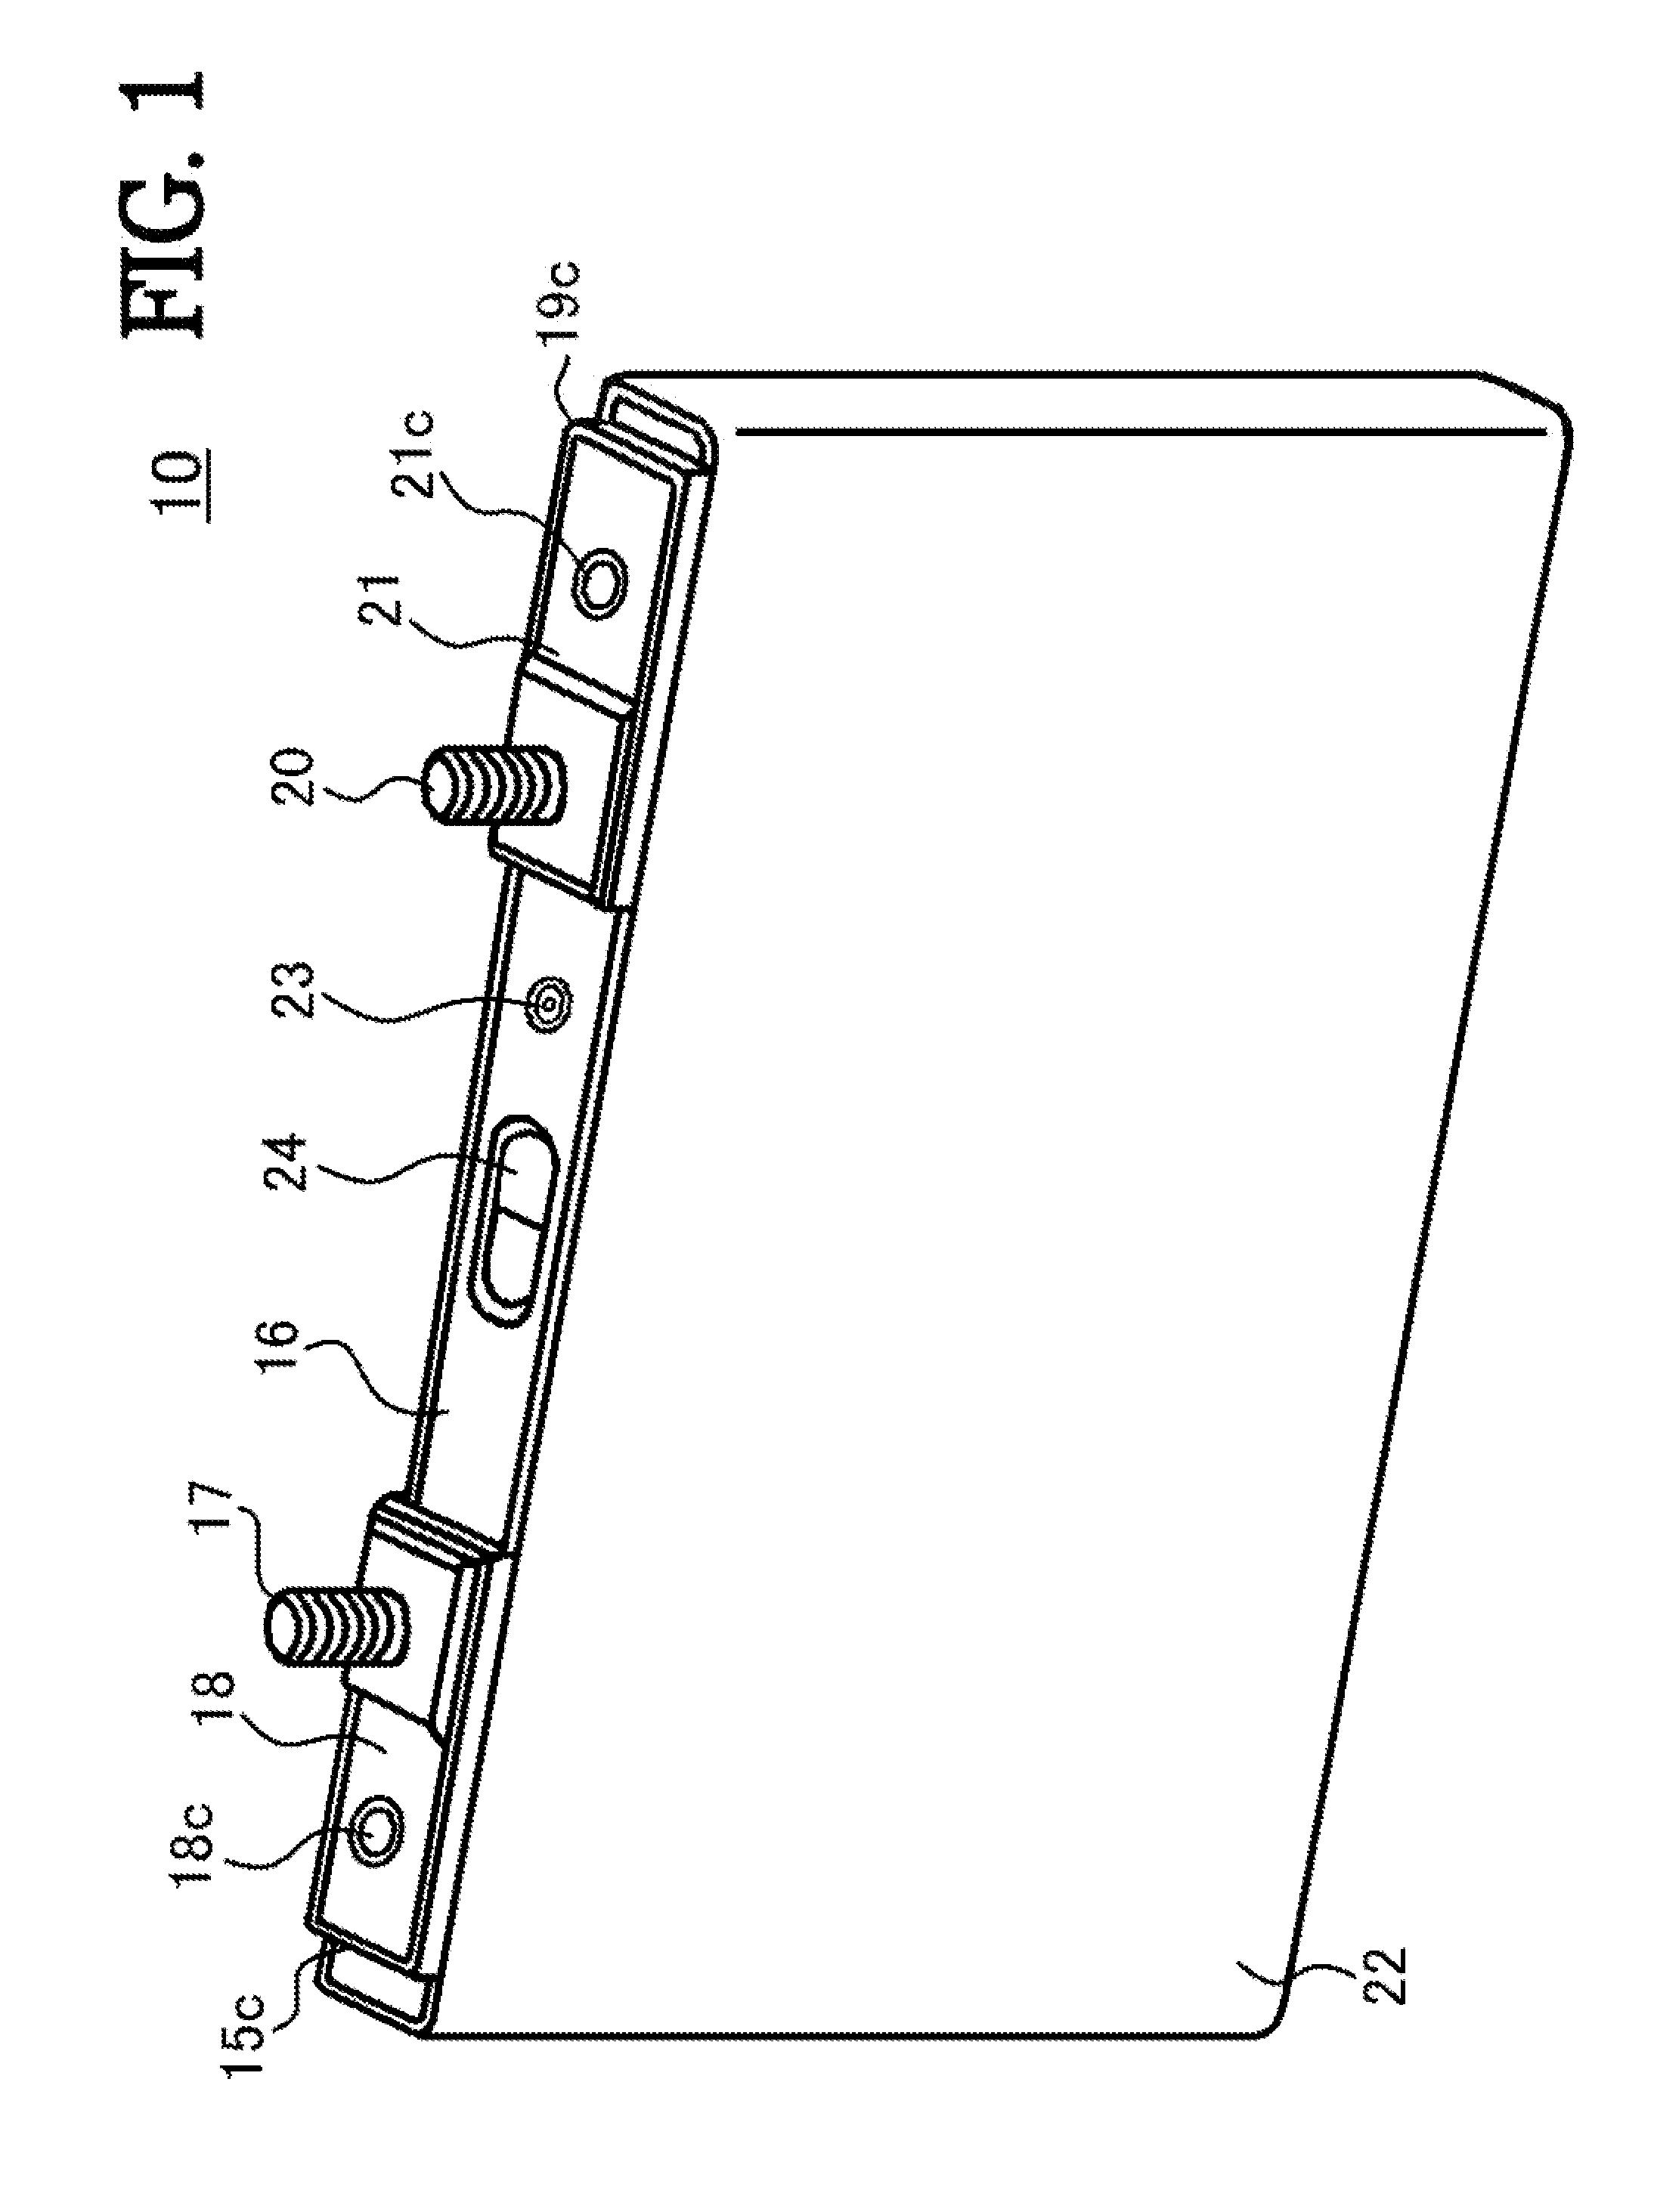 Prismatic secondary battery